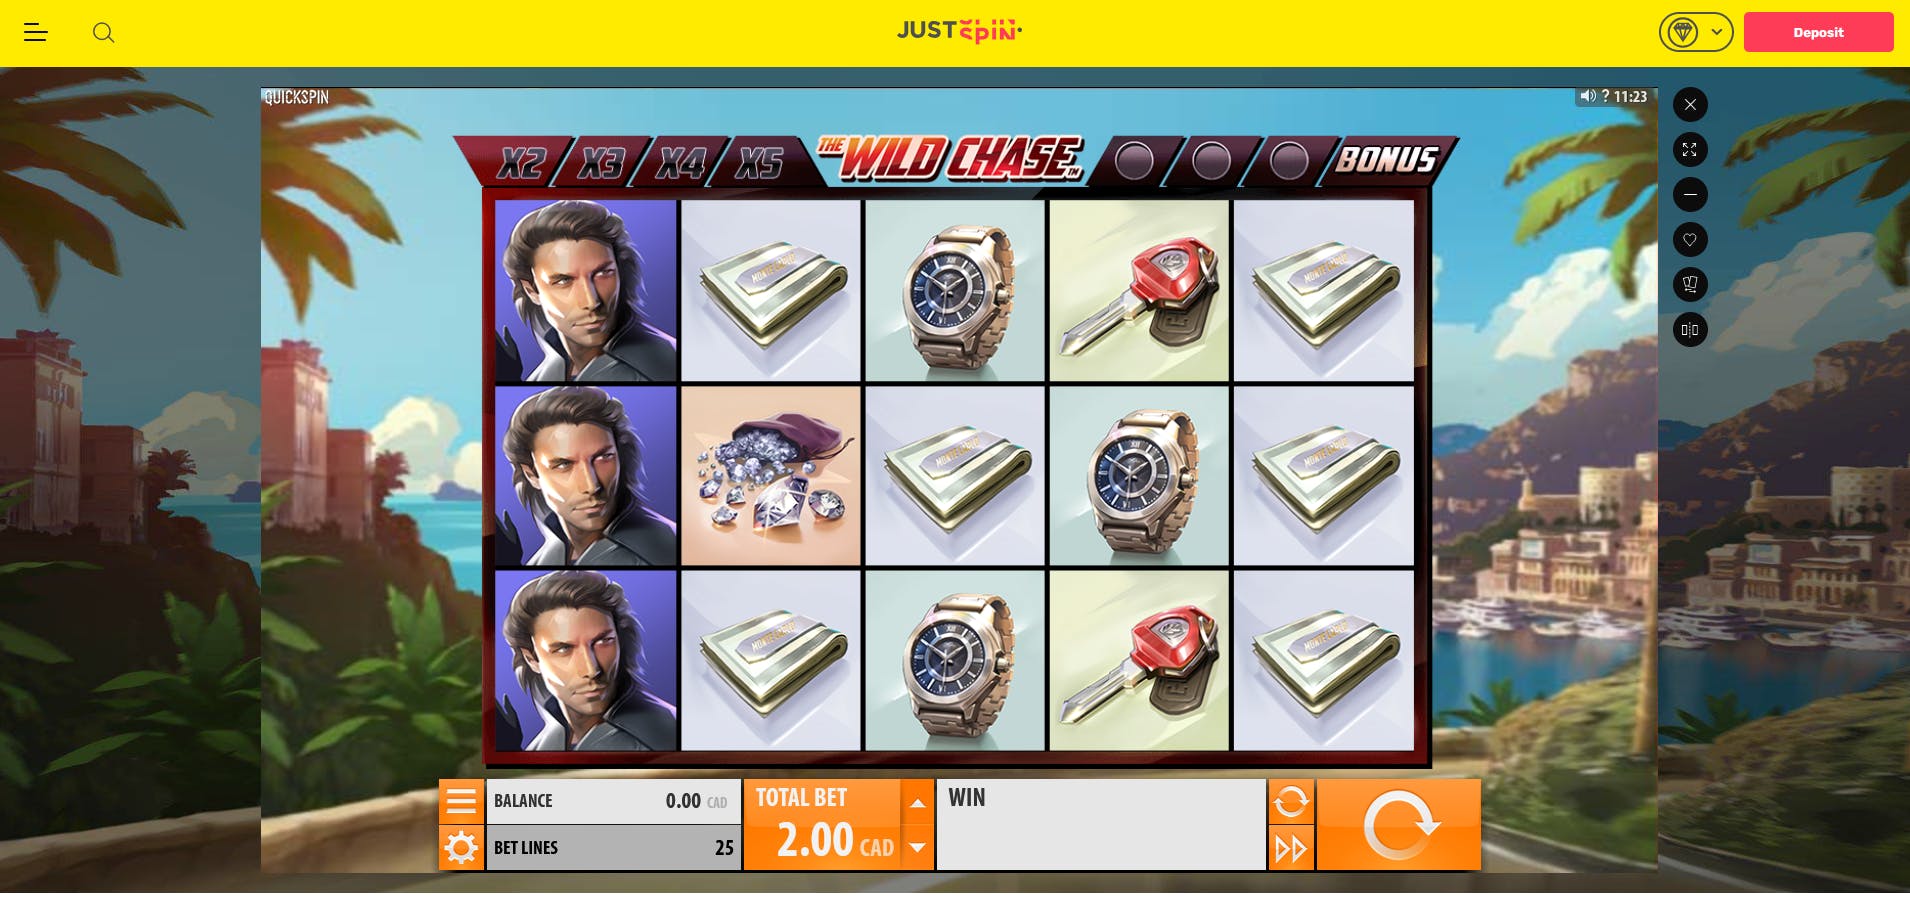 testing wild chase slot at just spin casino